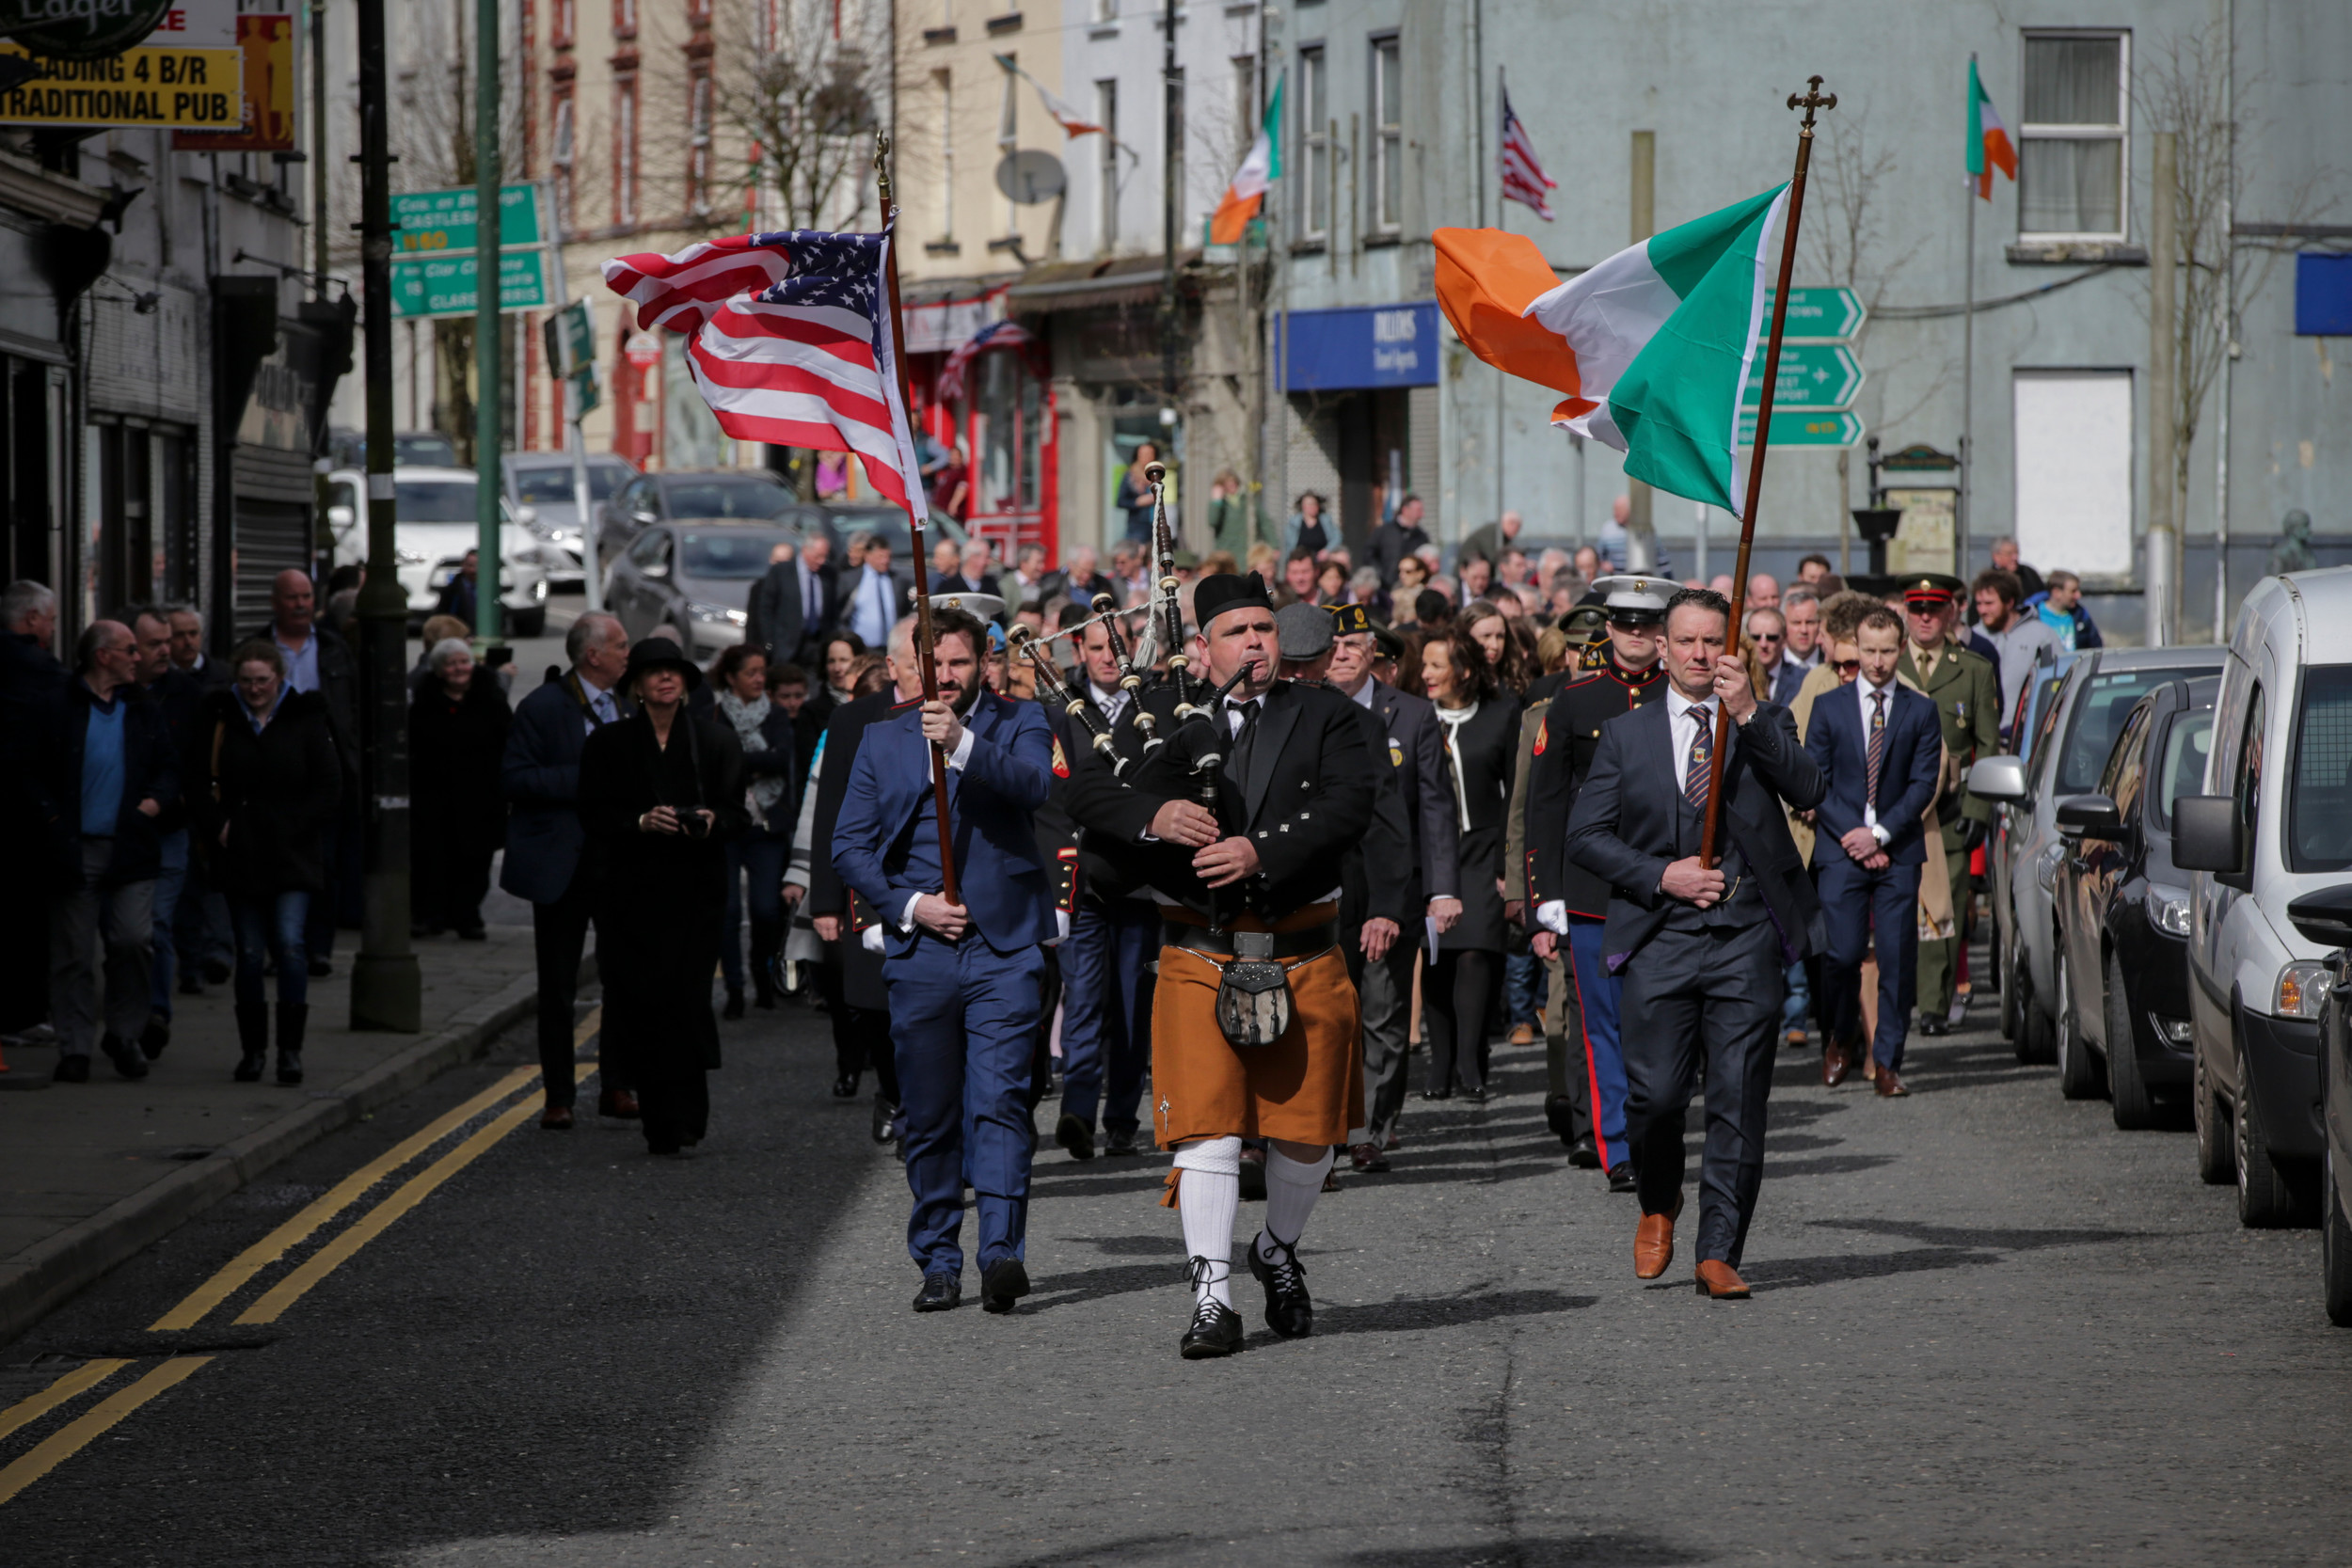 Members of the U.S. military and Irish Defense Forces marched in a parade in Ireland on March 30 to commemorate the 50th anniversary of Patrick Gallagher’s death. Gallagher, who called Lynbrook his home in America, died while serving in the Vietnam War.